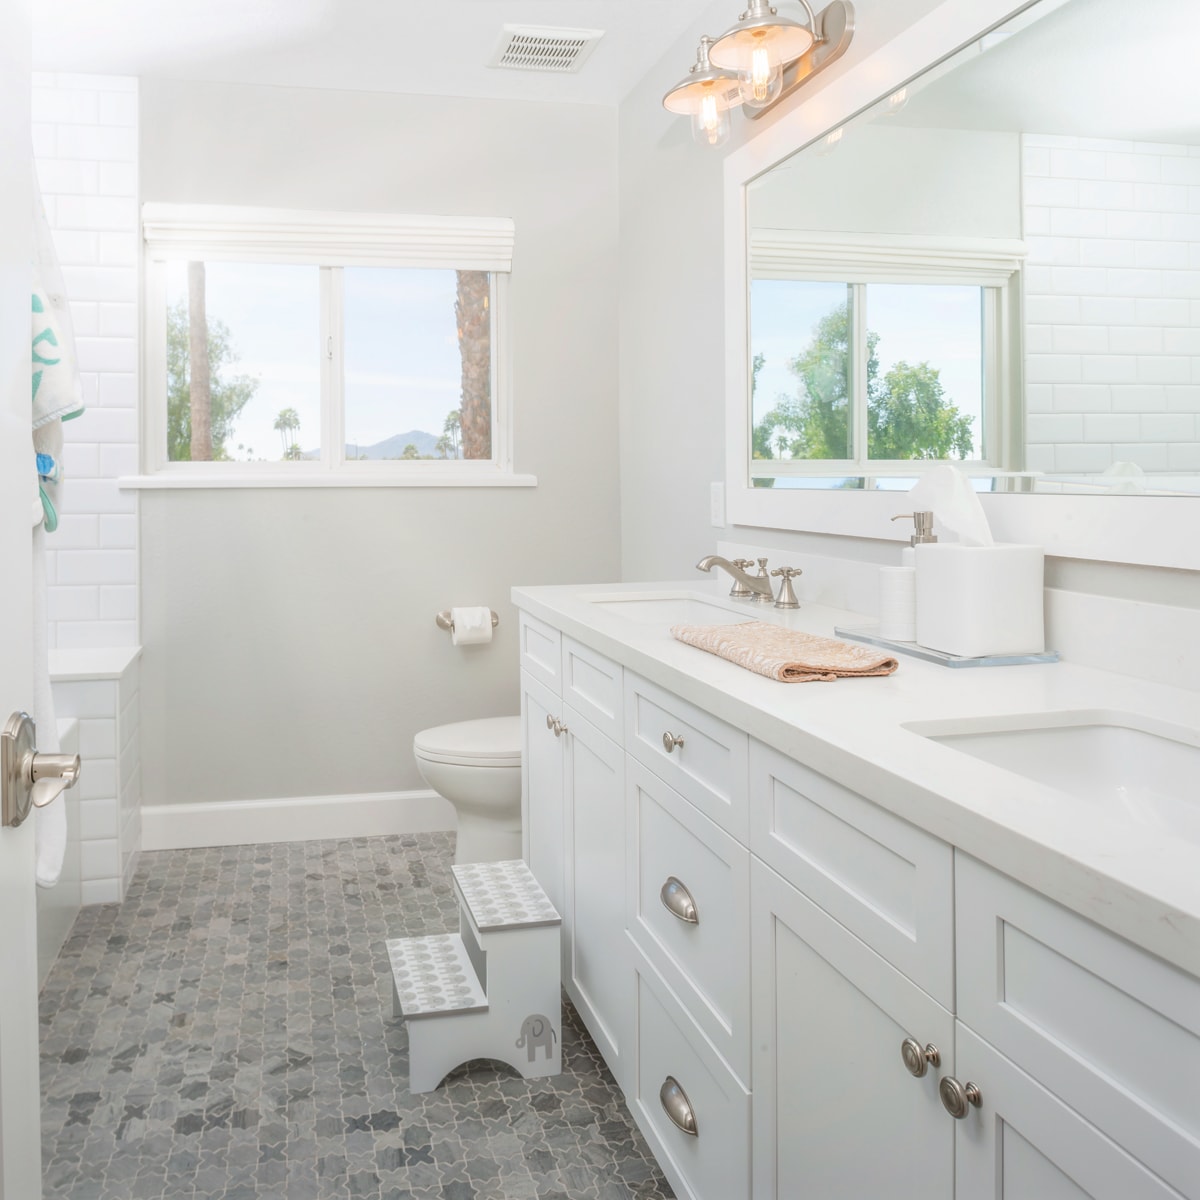 A white shaker-style bathroom vanity with grey tile flooring and a children's stepstool in front of a sink.